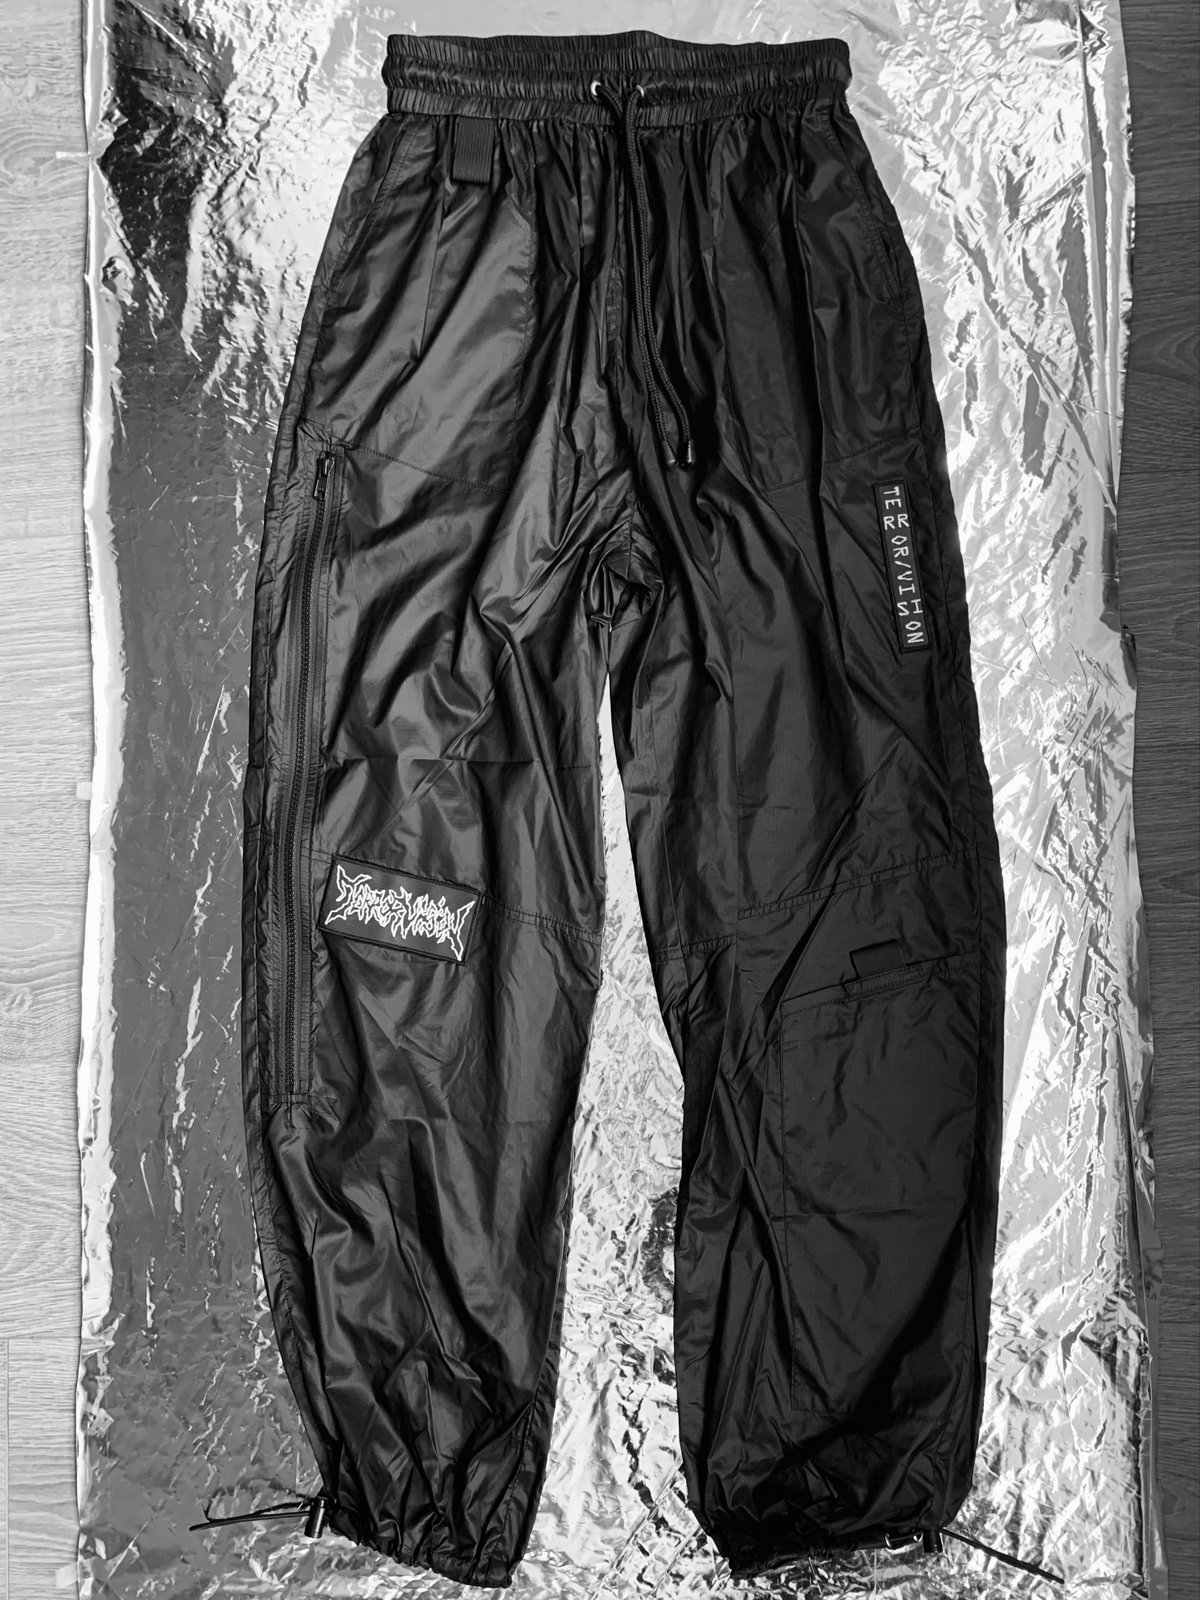 Image of TERROR VISION - nylon zip pants (with 3M reflective embroidery logo patch)